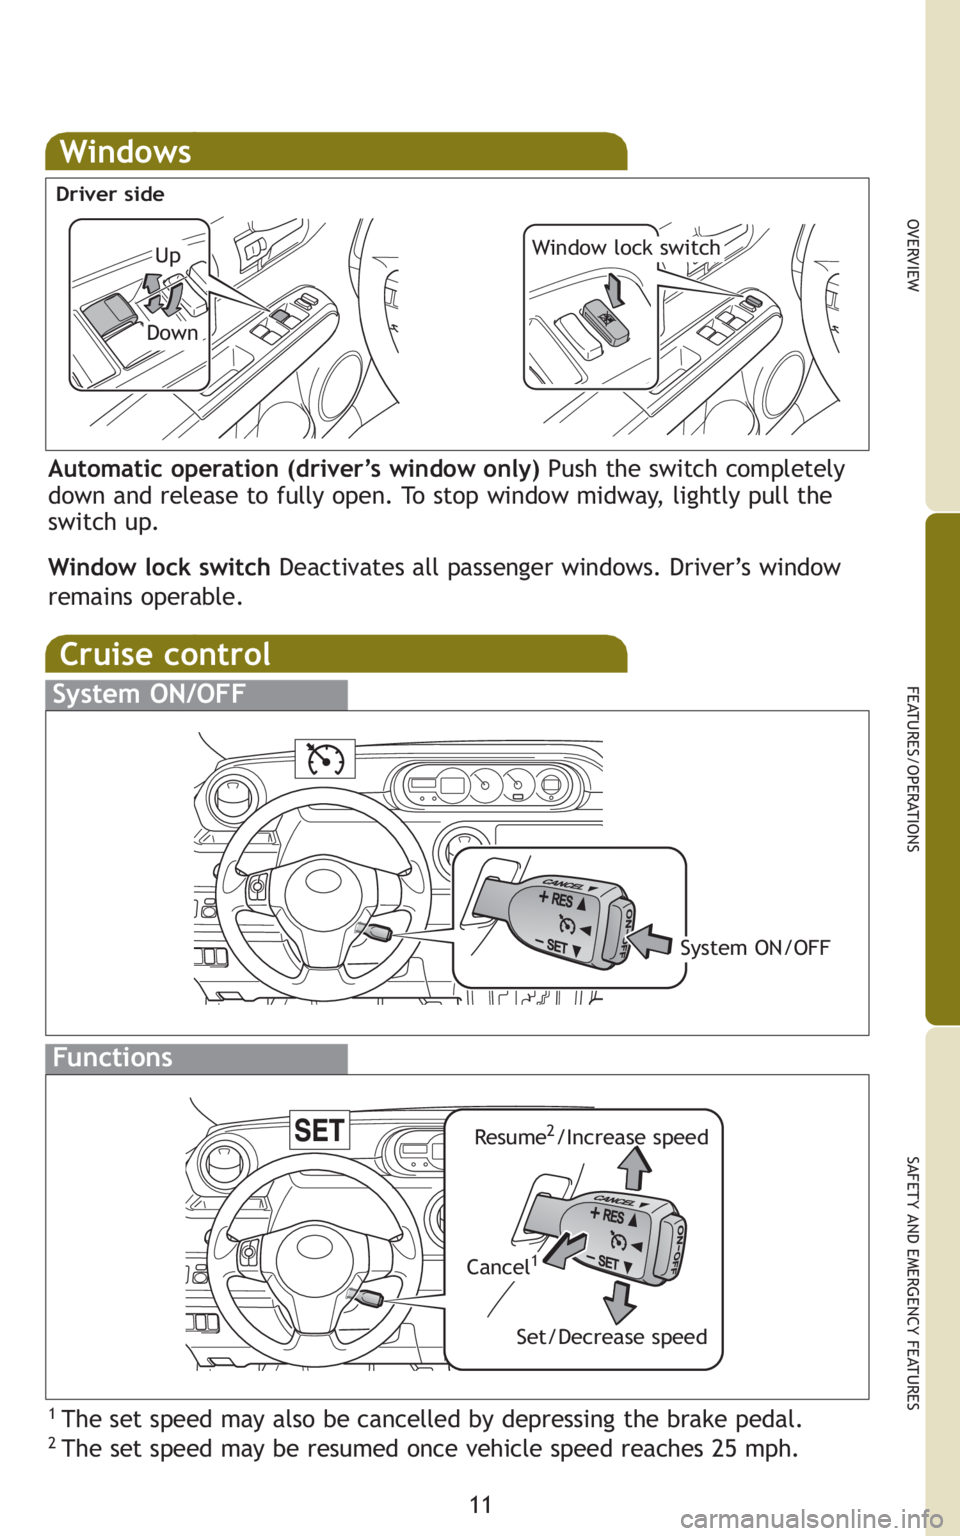 TOYOTA xB 2011   (in English) User Guide 11
OVERVIEW
FEATURES/OPERATIONS
SAFETY AND EMERGENCY FEATURES
Windows
Automatic operation (driver’s window only) Push the switch completely
down and release to fully open. To stop window midway, lig